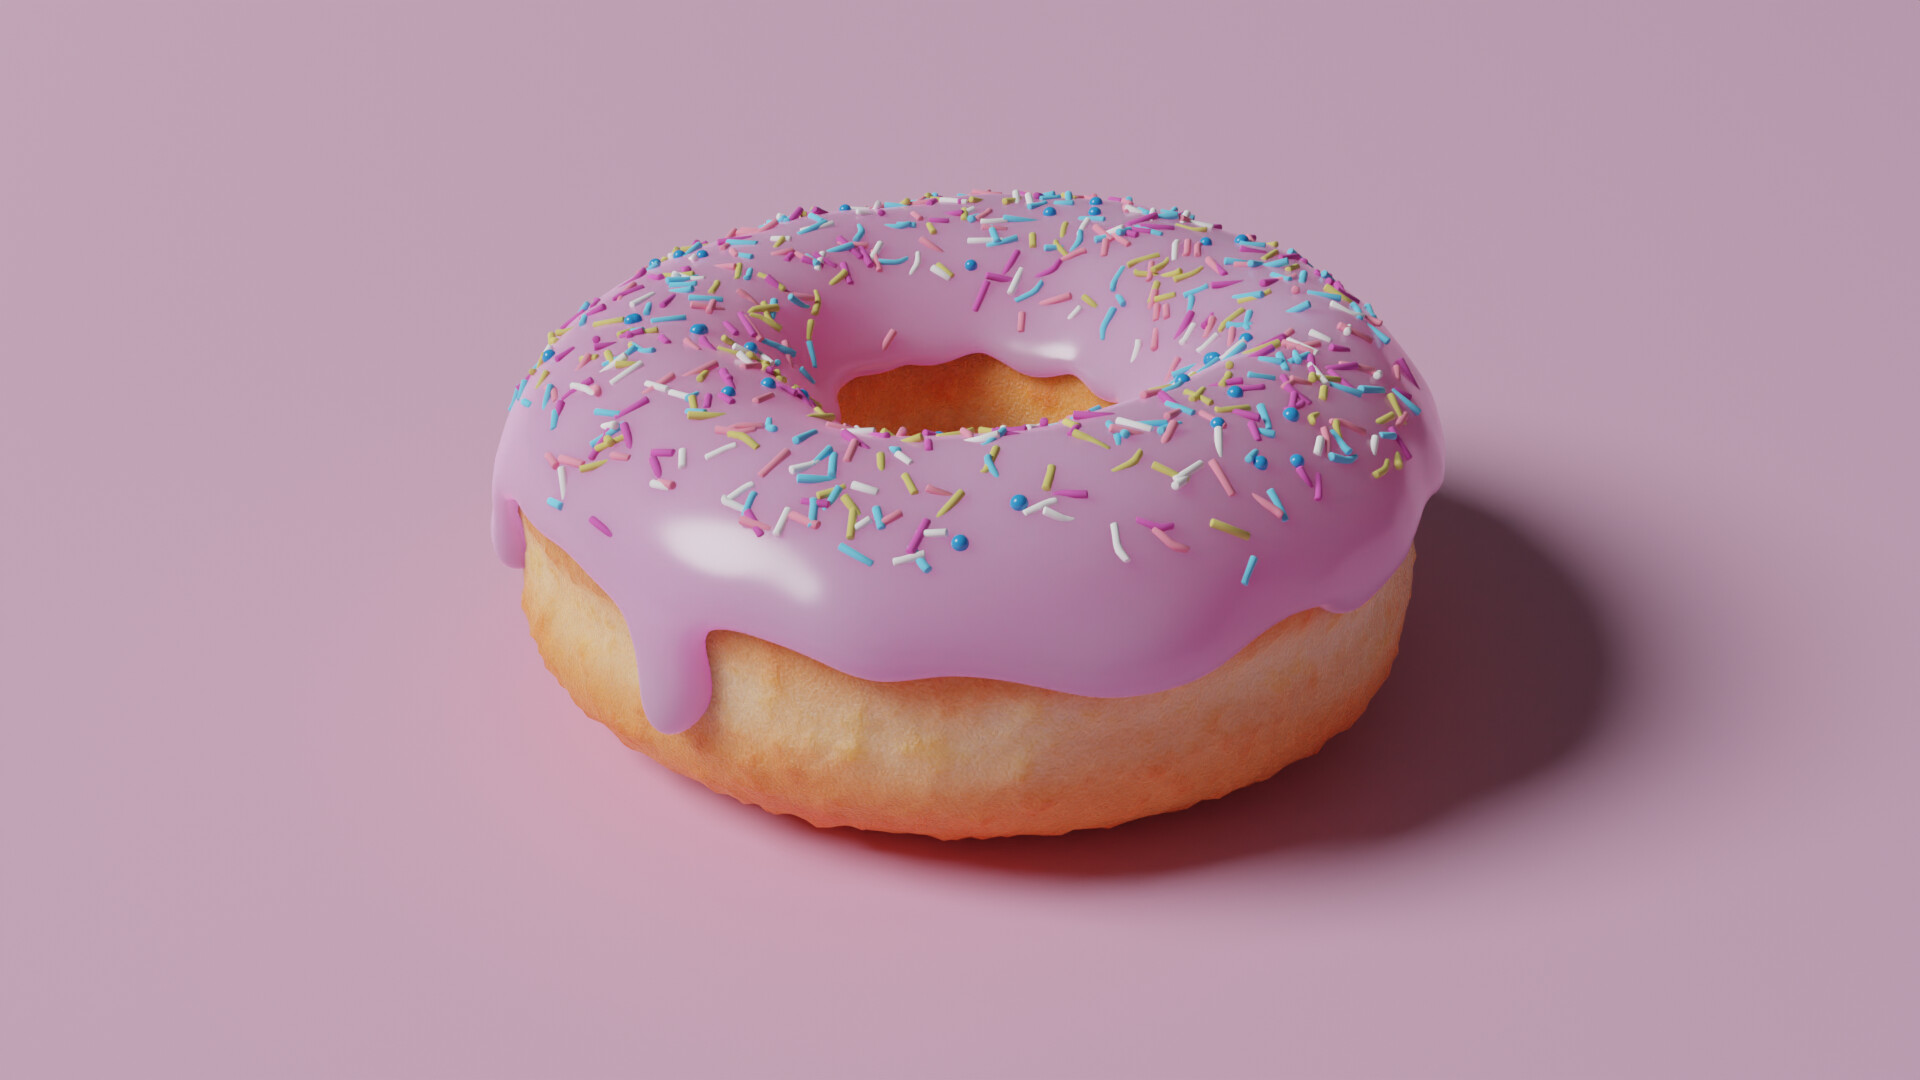 doughnut with pink icing and sprinkles